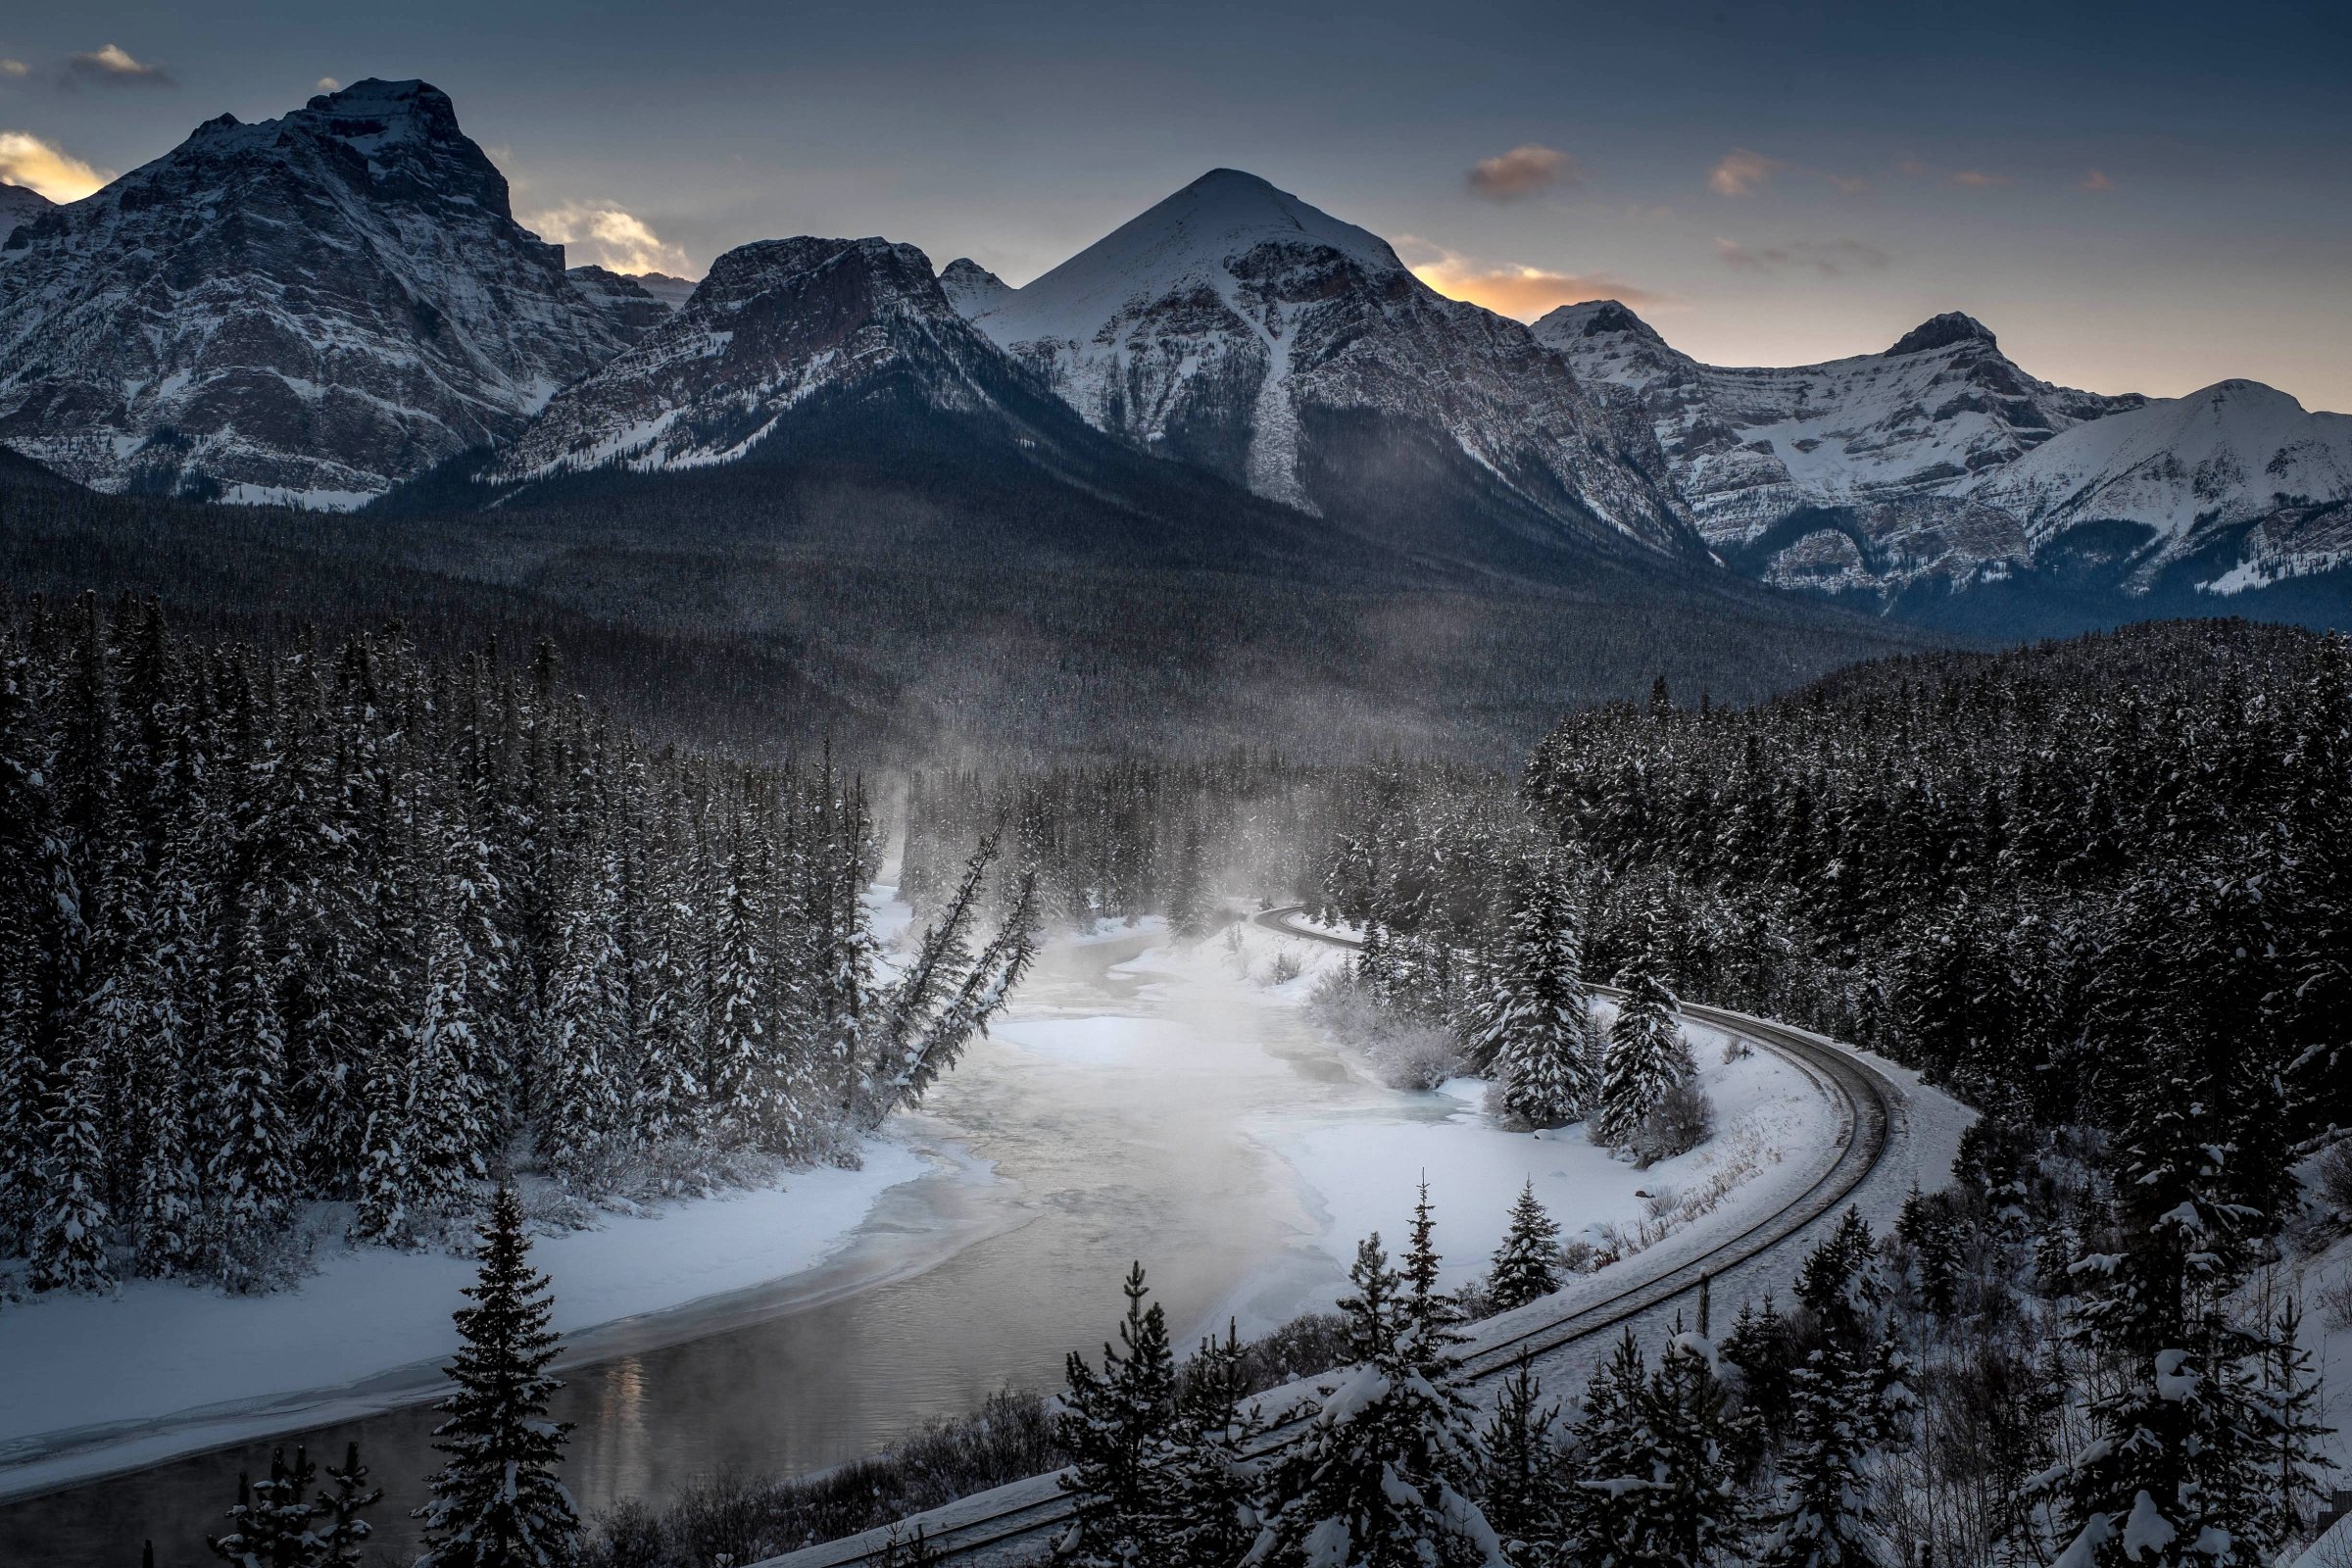 The famous Morant's Curve, offering a beautiful view of the frozen Bow River and the Canadian Pacific Railway at Banff National Park near Lake Louise, Canada, on Dec. 6, 2013